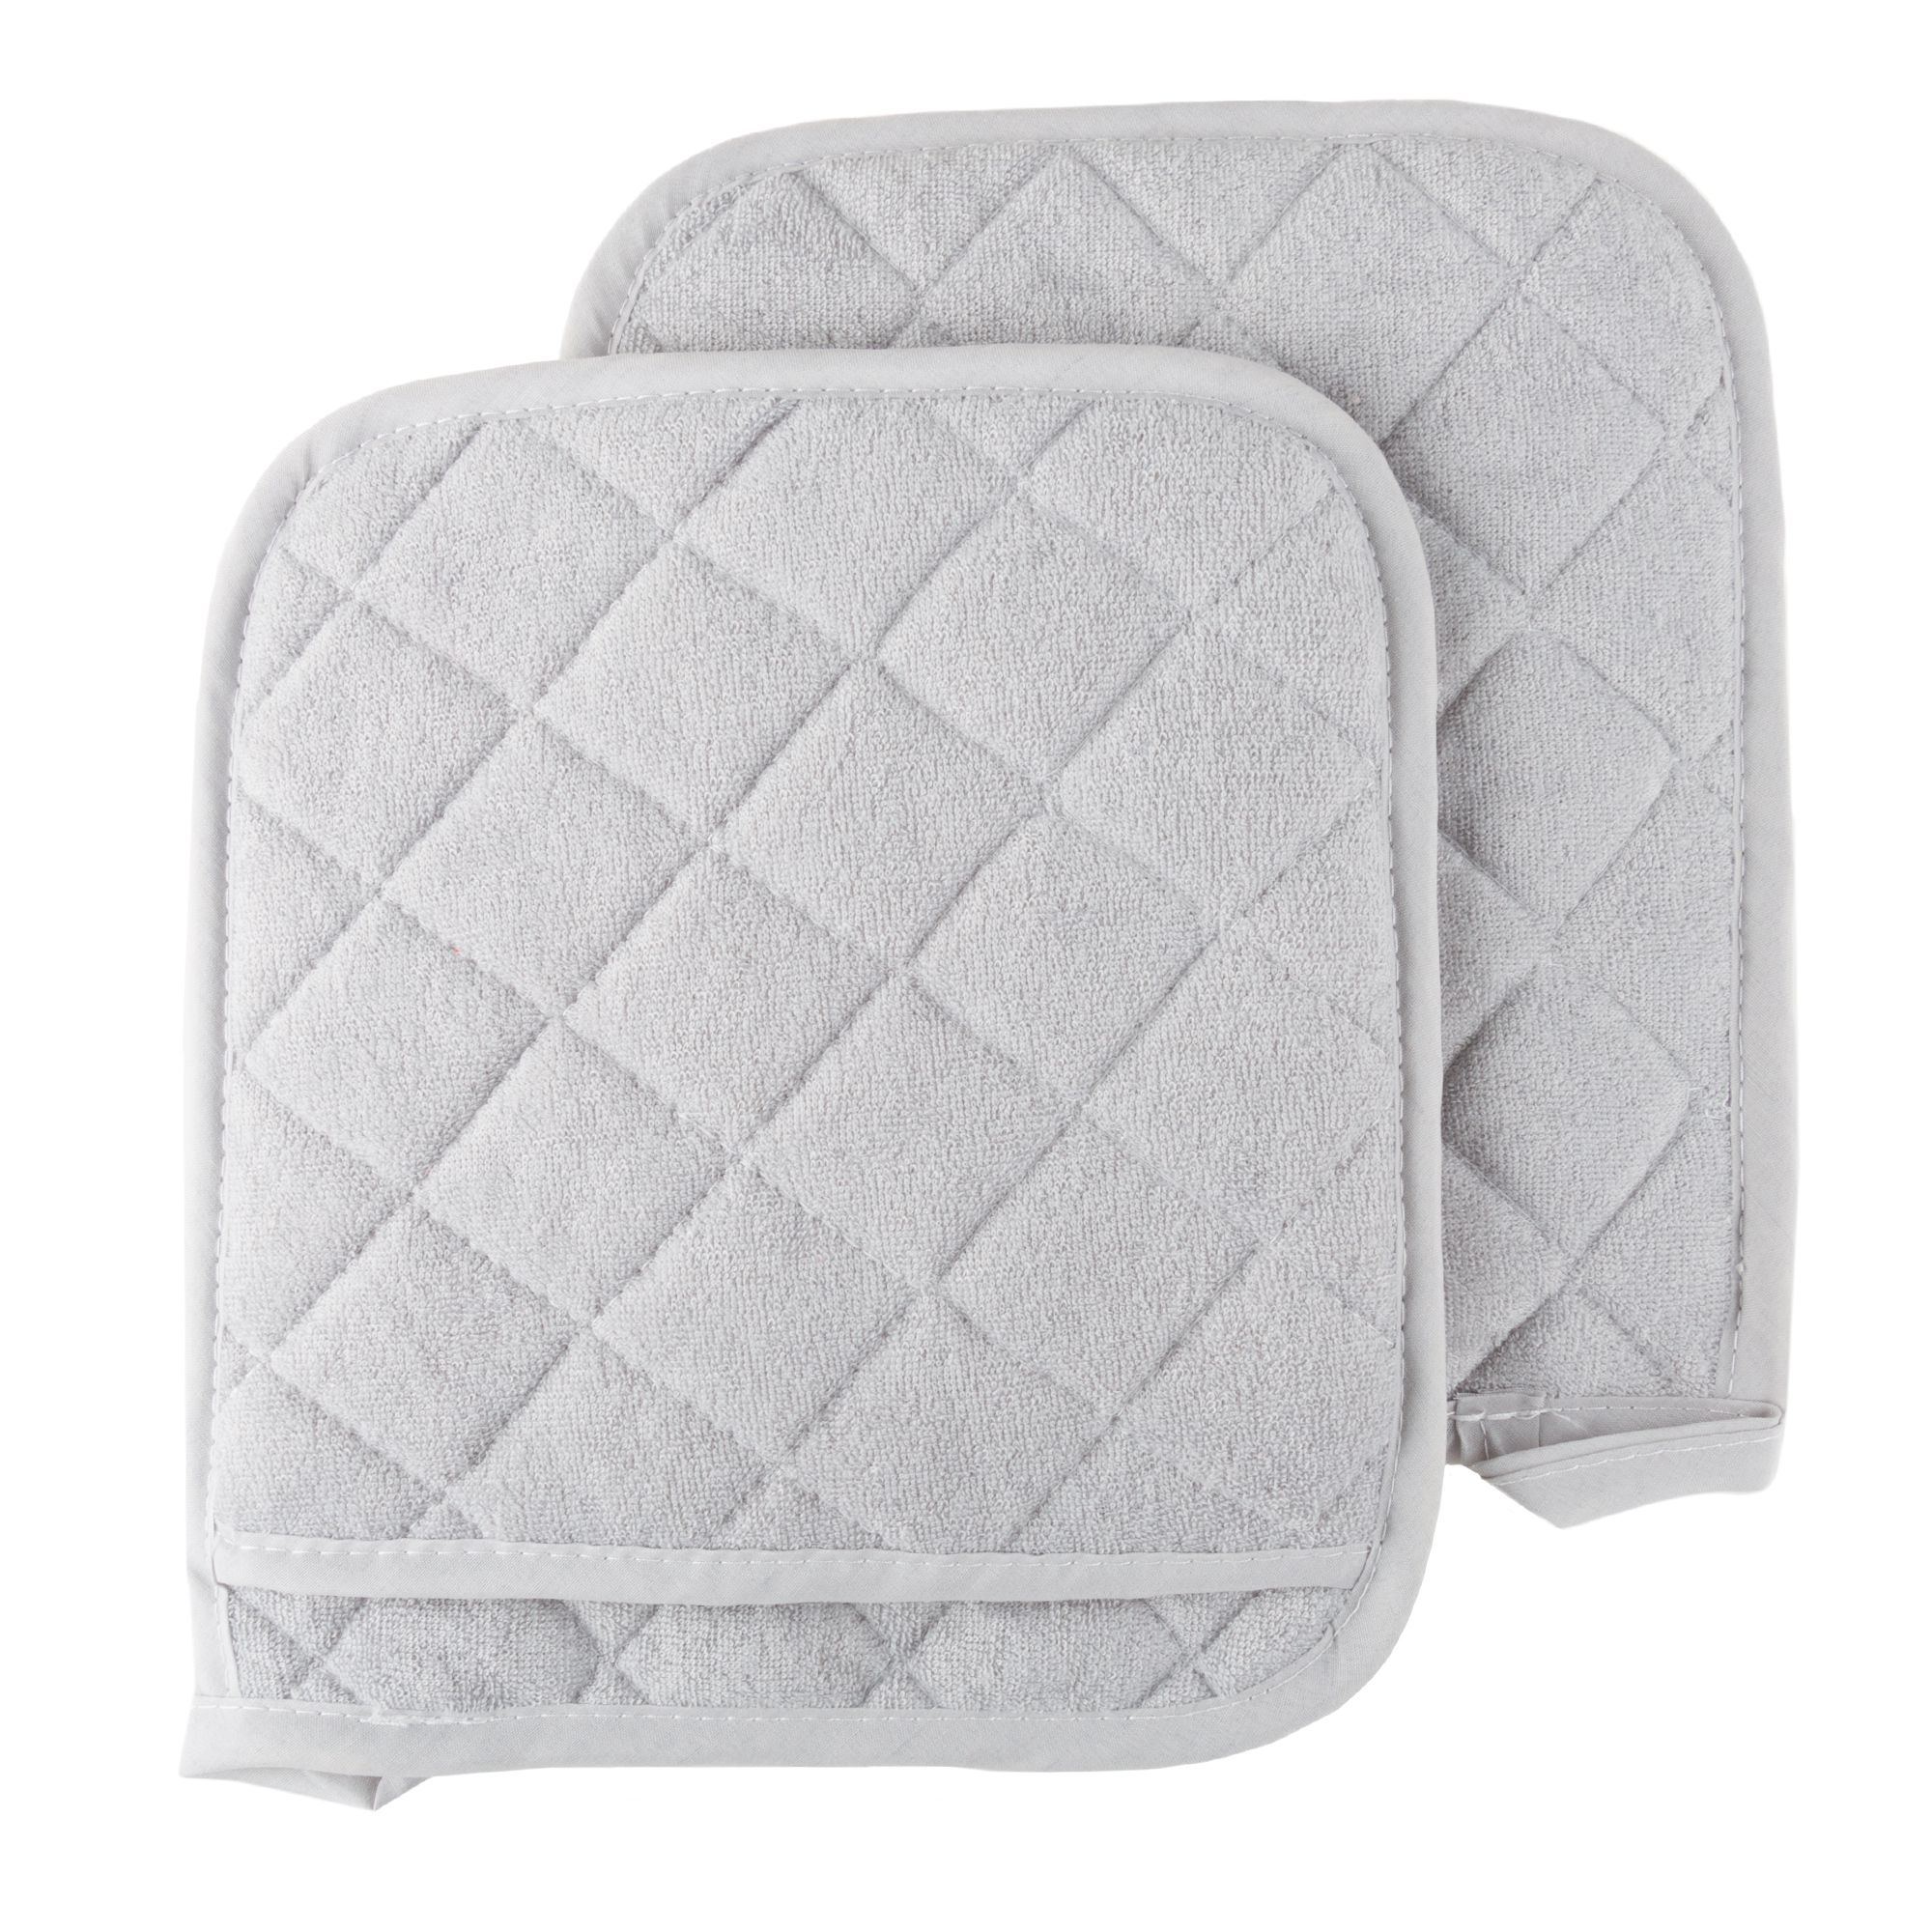 Set of 2 Cotton Pot Holders Flame Heat Protection Big Oven Mitts 8 x 9 Gray